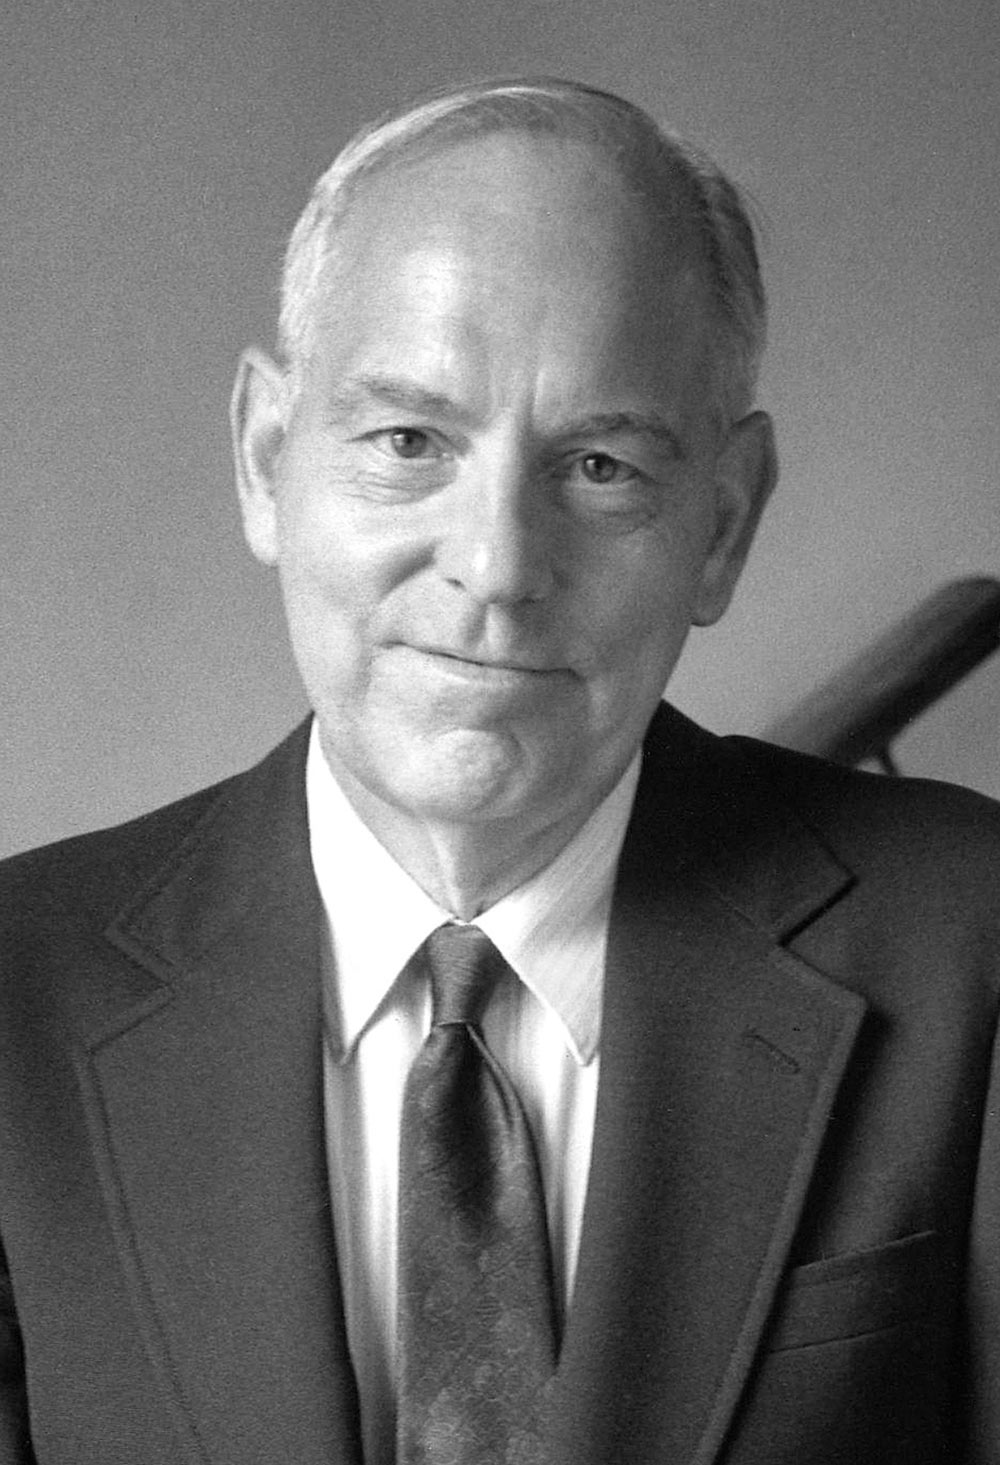 A black and white portrait headshot photograph of Rev. James Hammerlee (Former Bucknell chaplain, steadfast student supporter and lover of the arts) grins in a business suit and tie attire style